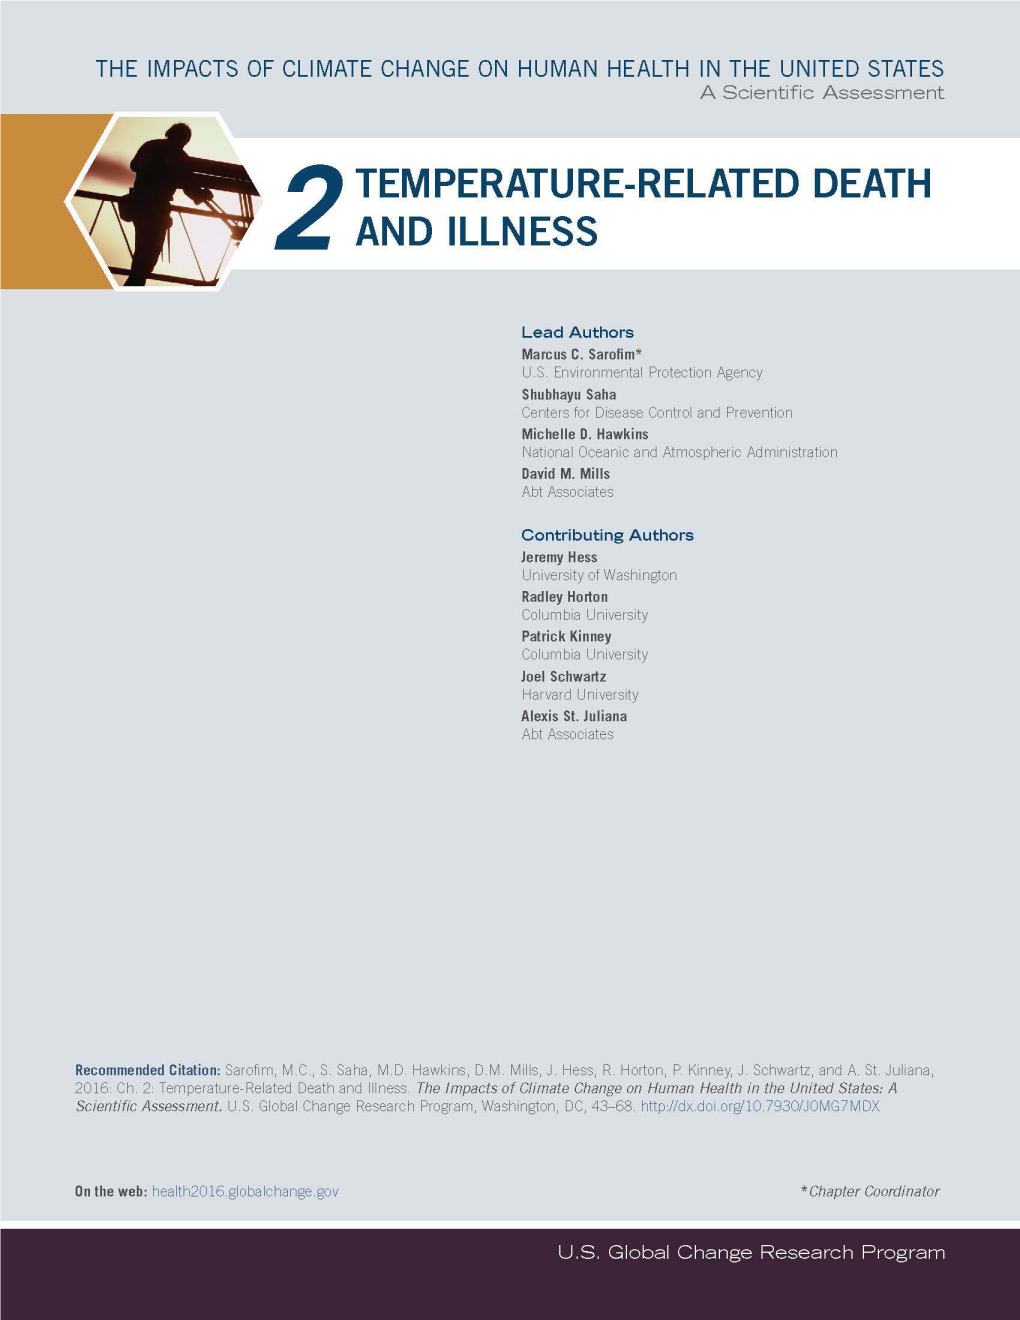 2 Temperature-Related Death and Illness